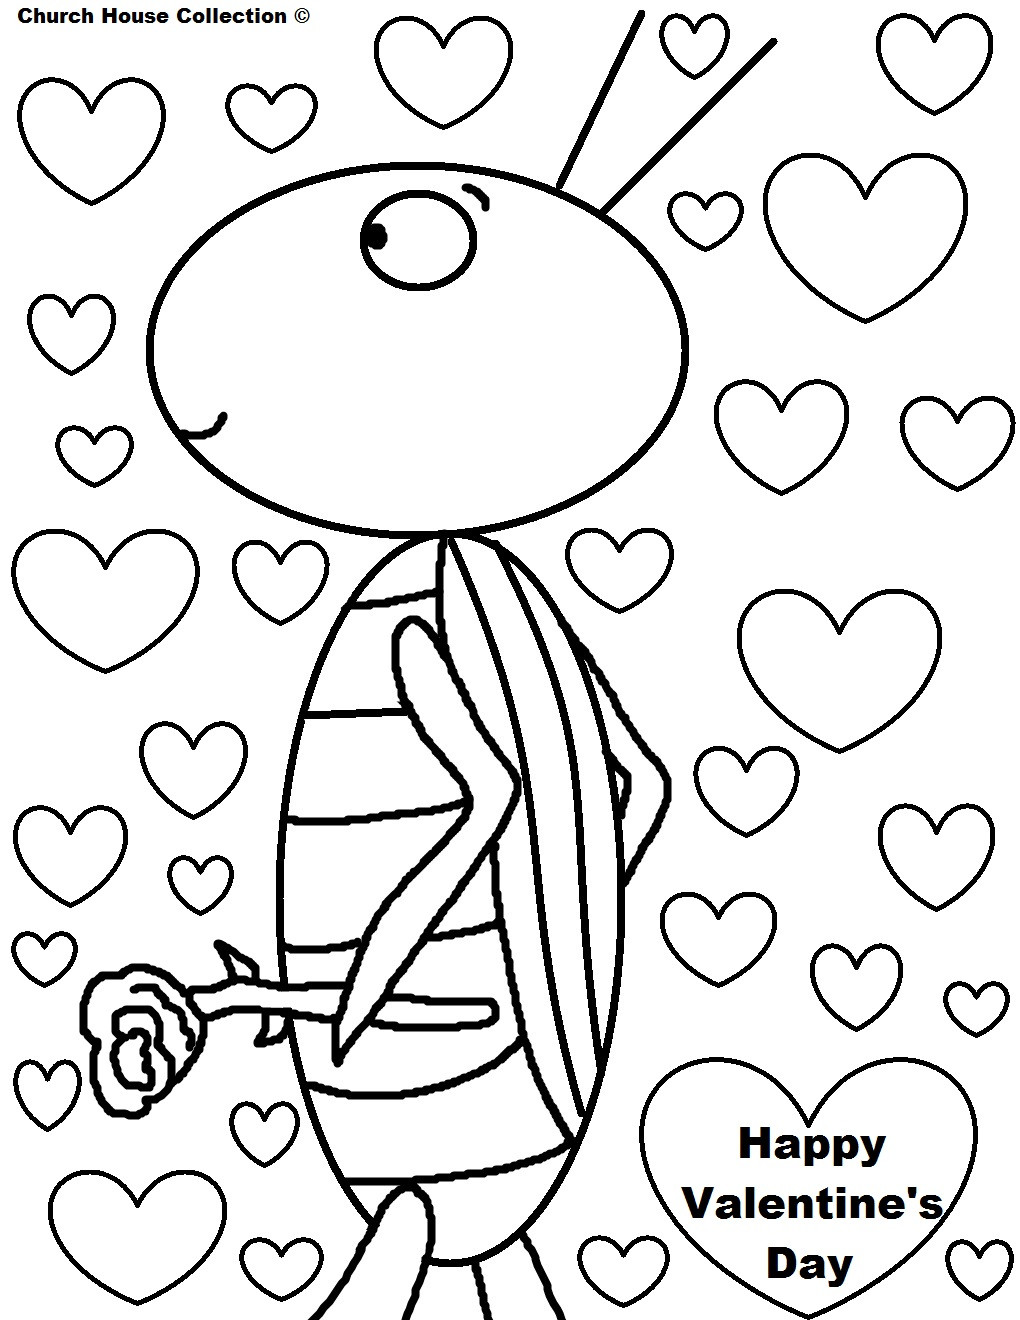 Printable Valentine Day Coloring Pages
 Church House Collection Blog Valentine s Day Coloring